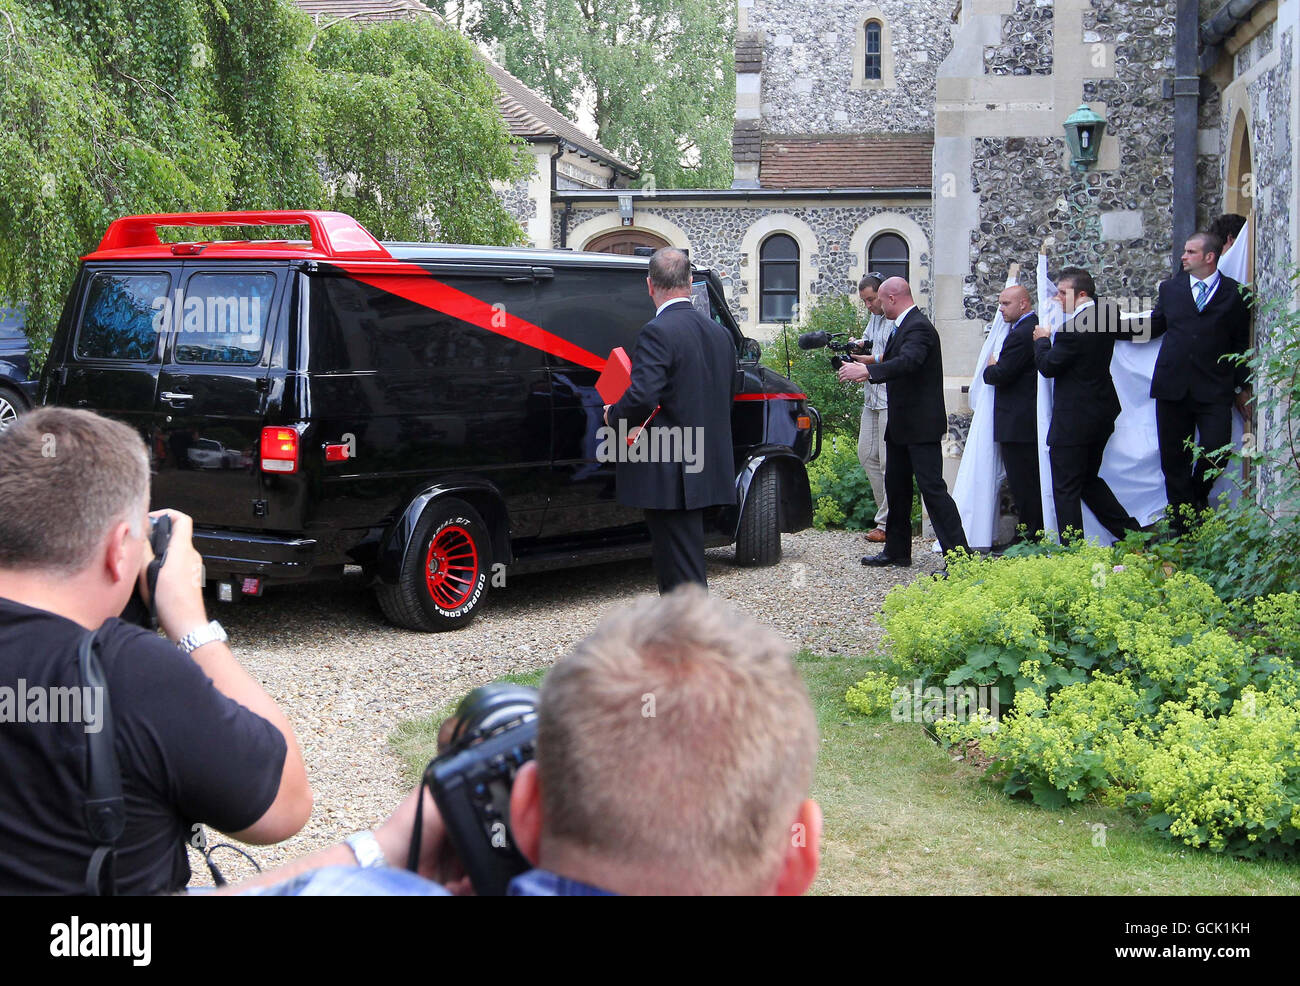 Katie Price and Alex Reid arrive in a replica A-Team van for their blessing ceremony at St Paul's Church, Woldingham, Surrey. Stock Photo